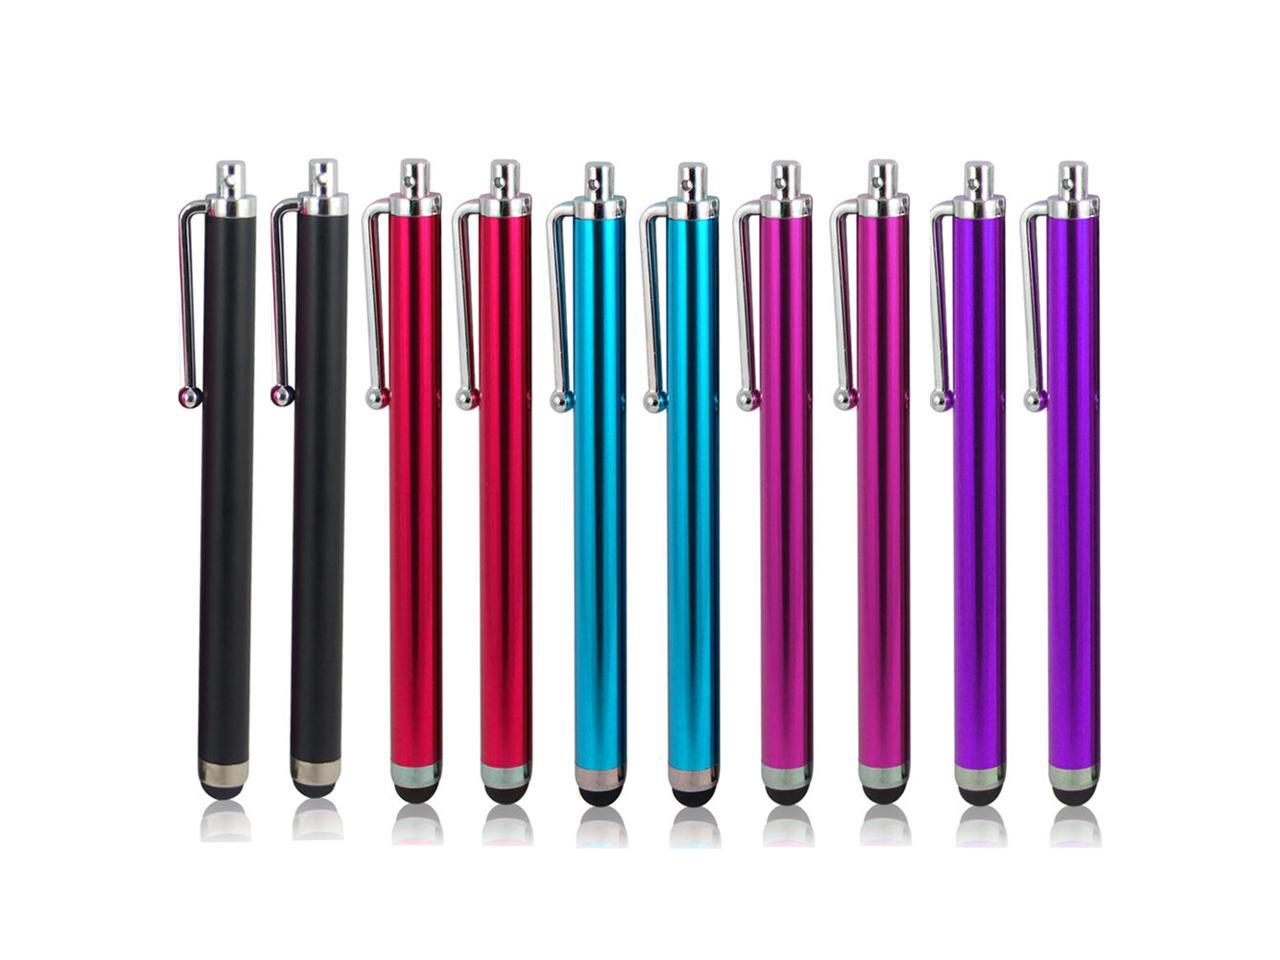 2 in1 Touch Screen Pen Stylus Universal For iPhone iPad Samsung Tablet Phone PC